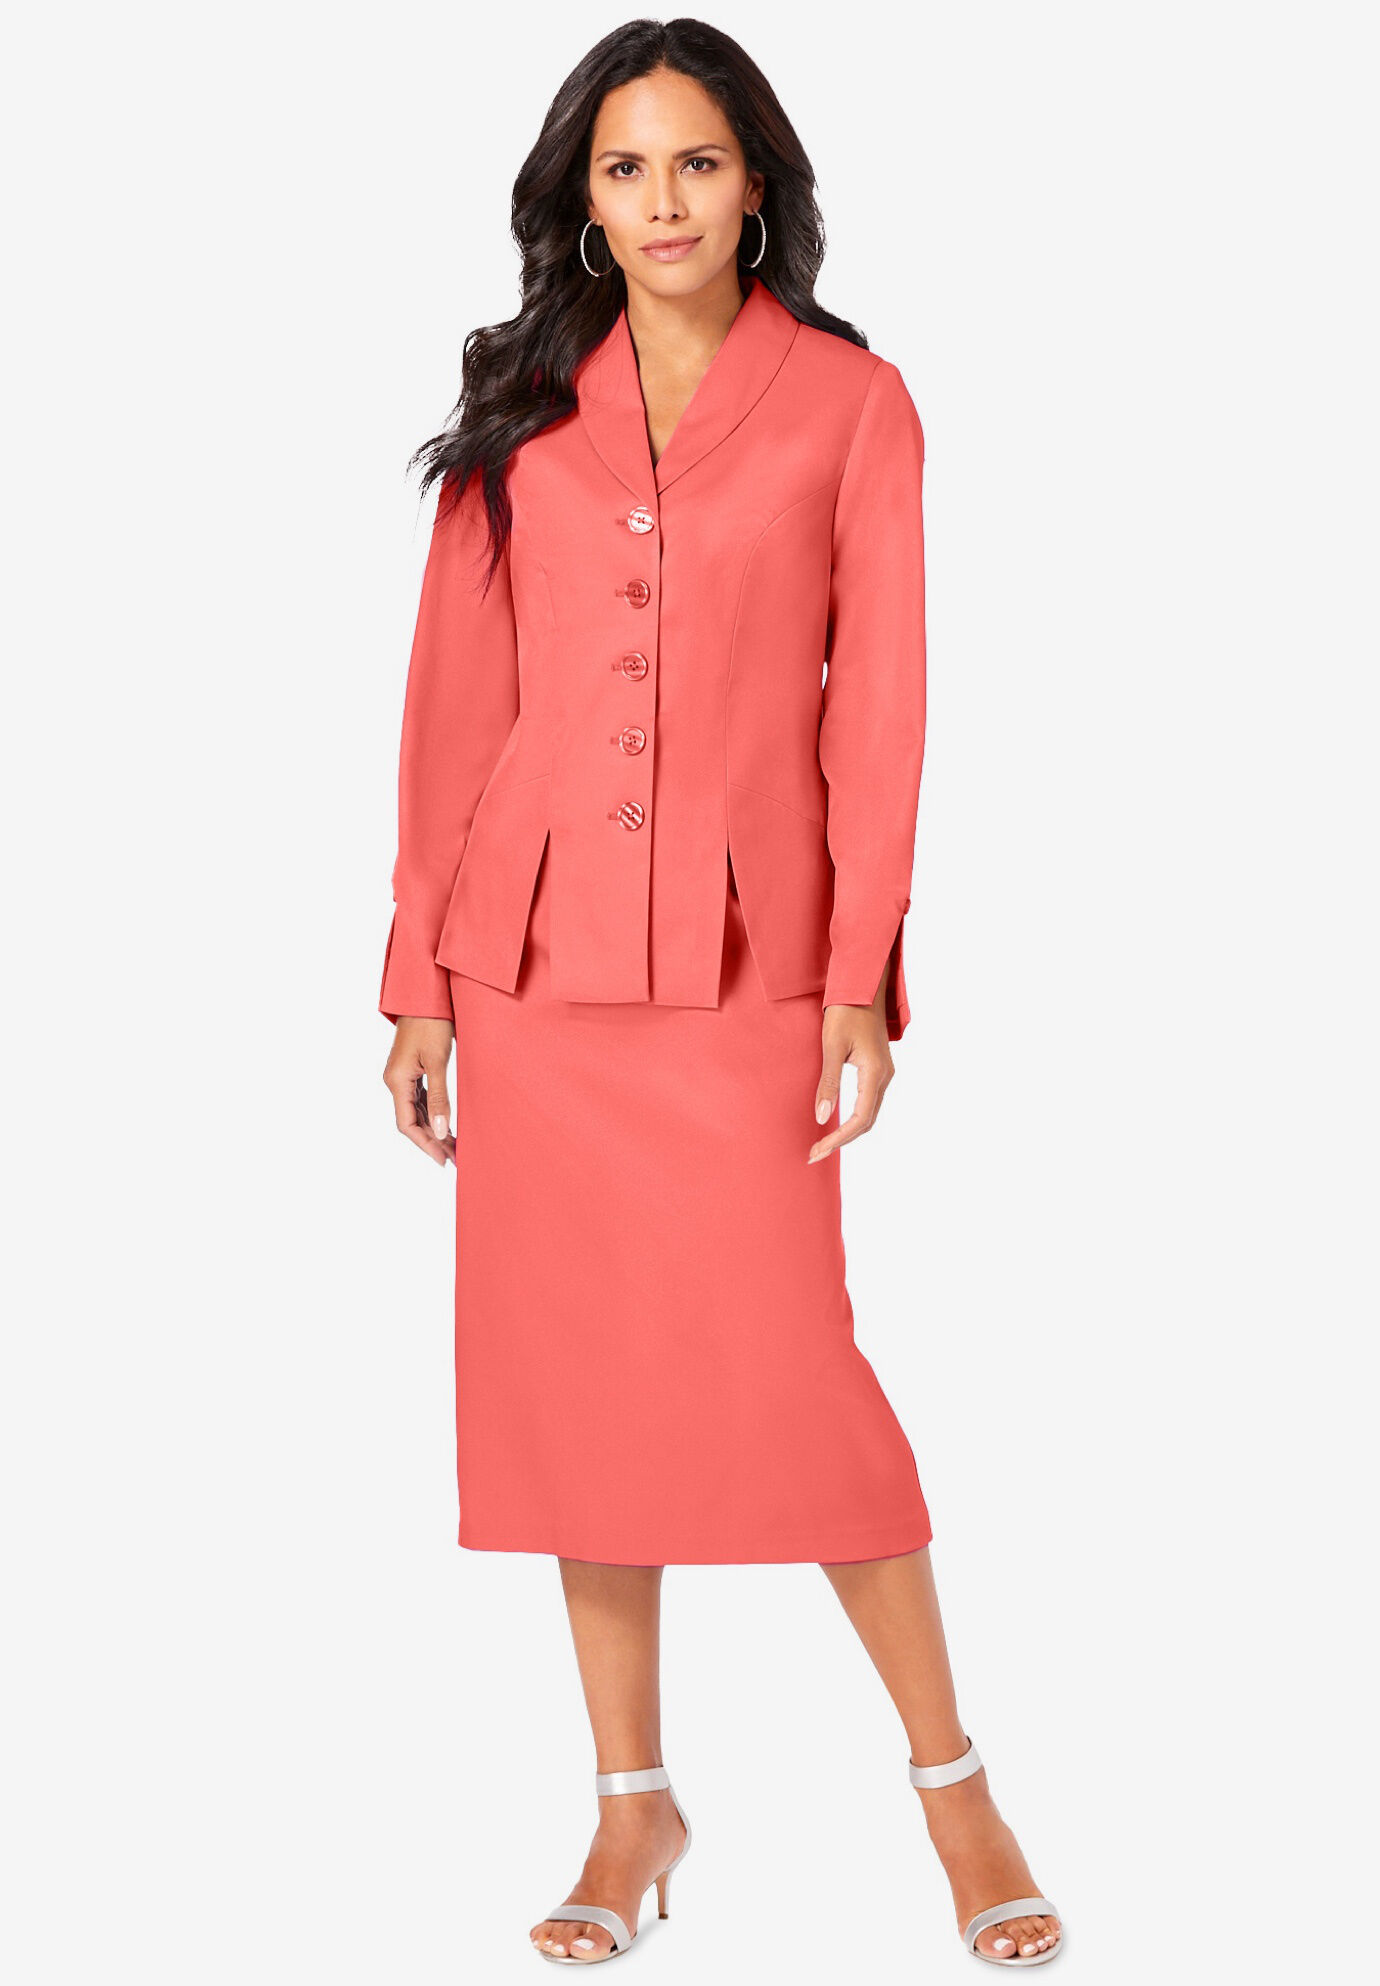 Roamans Womens Plus Size Two-Piece Skirt Suit with Shawl-Collar Jacket 